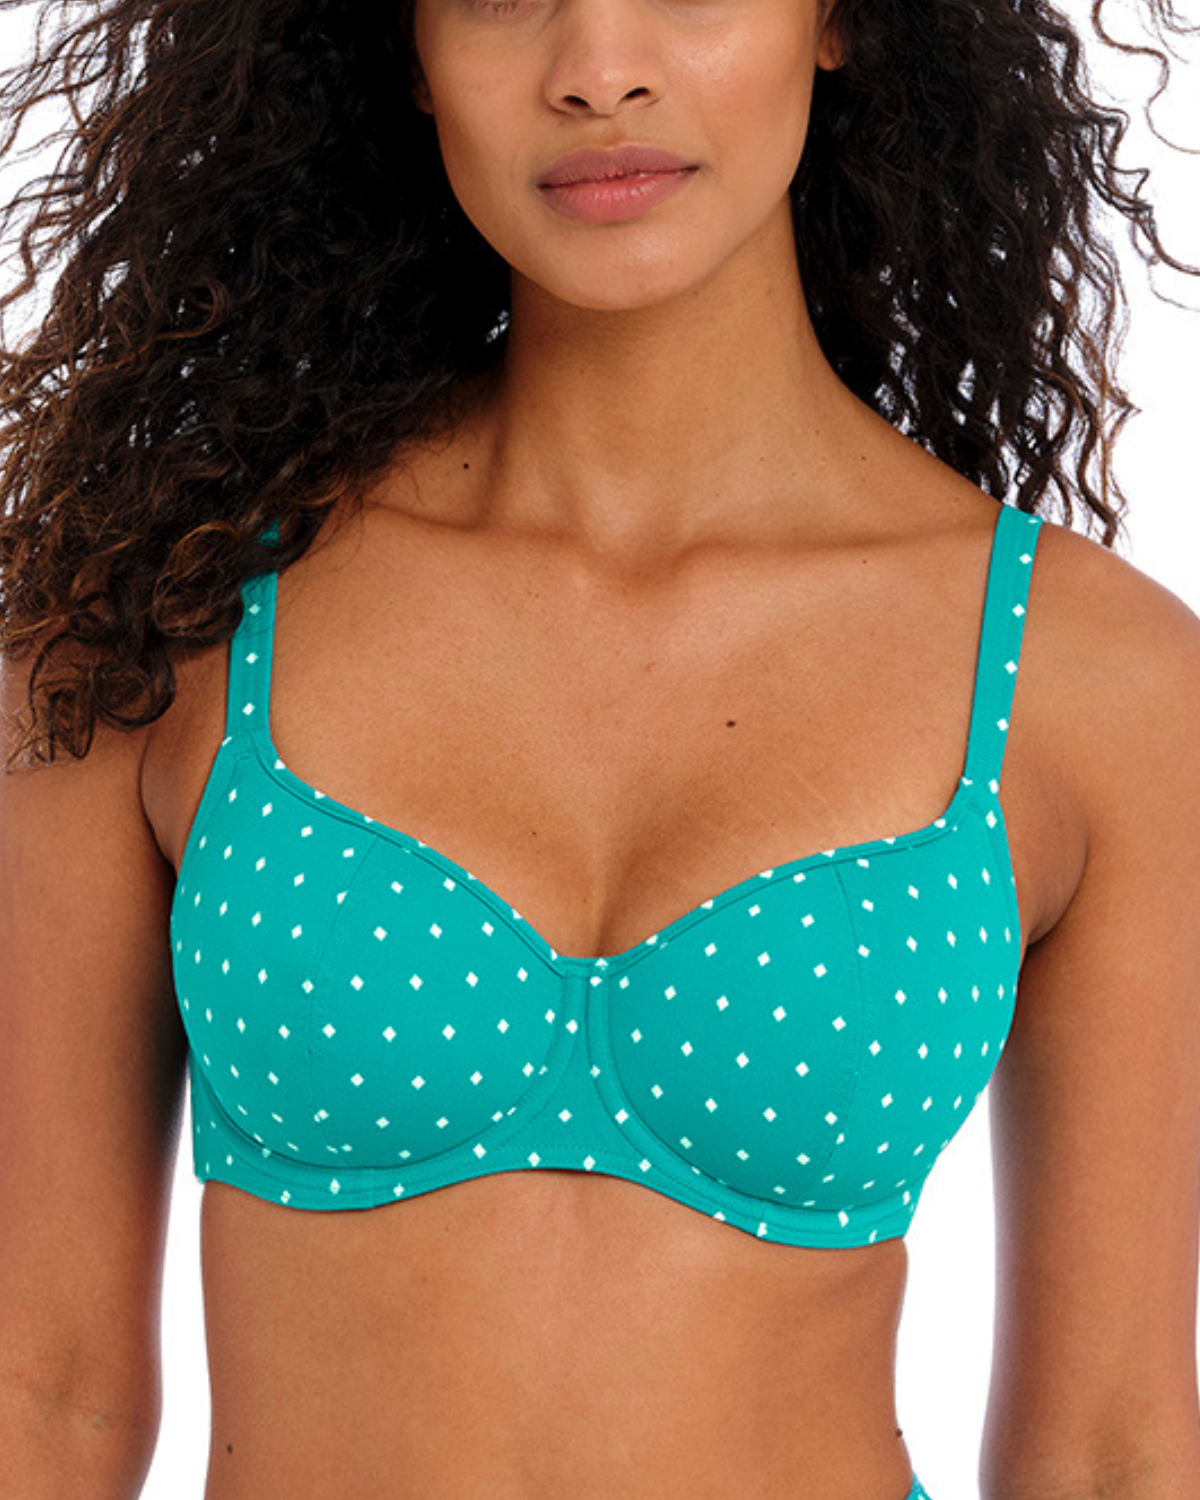 Model wearing a underwire sweetheart bikini top in a white dot and turquoise base print